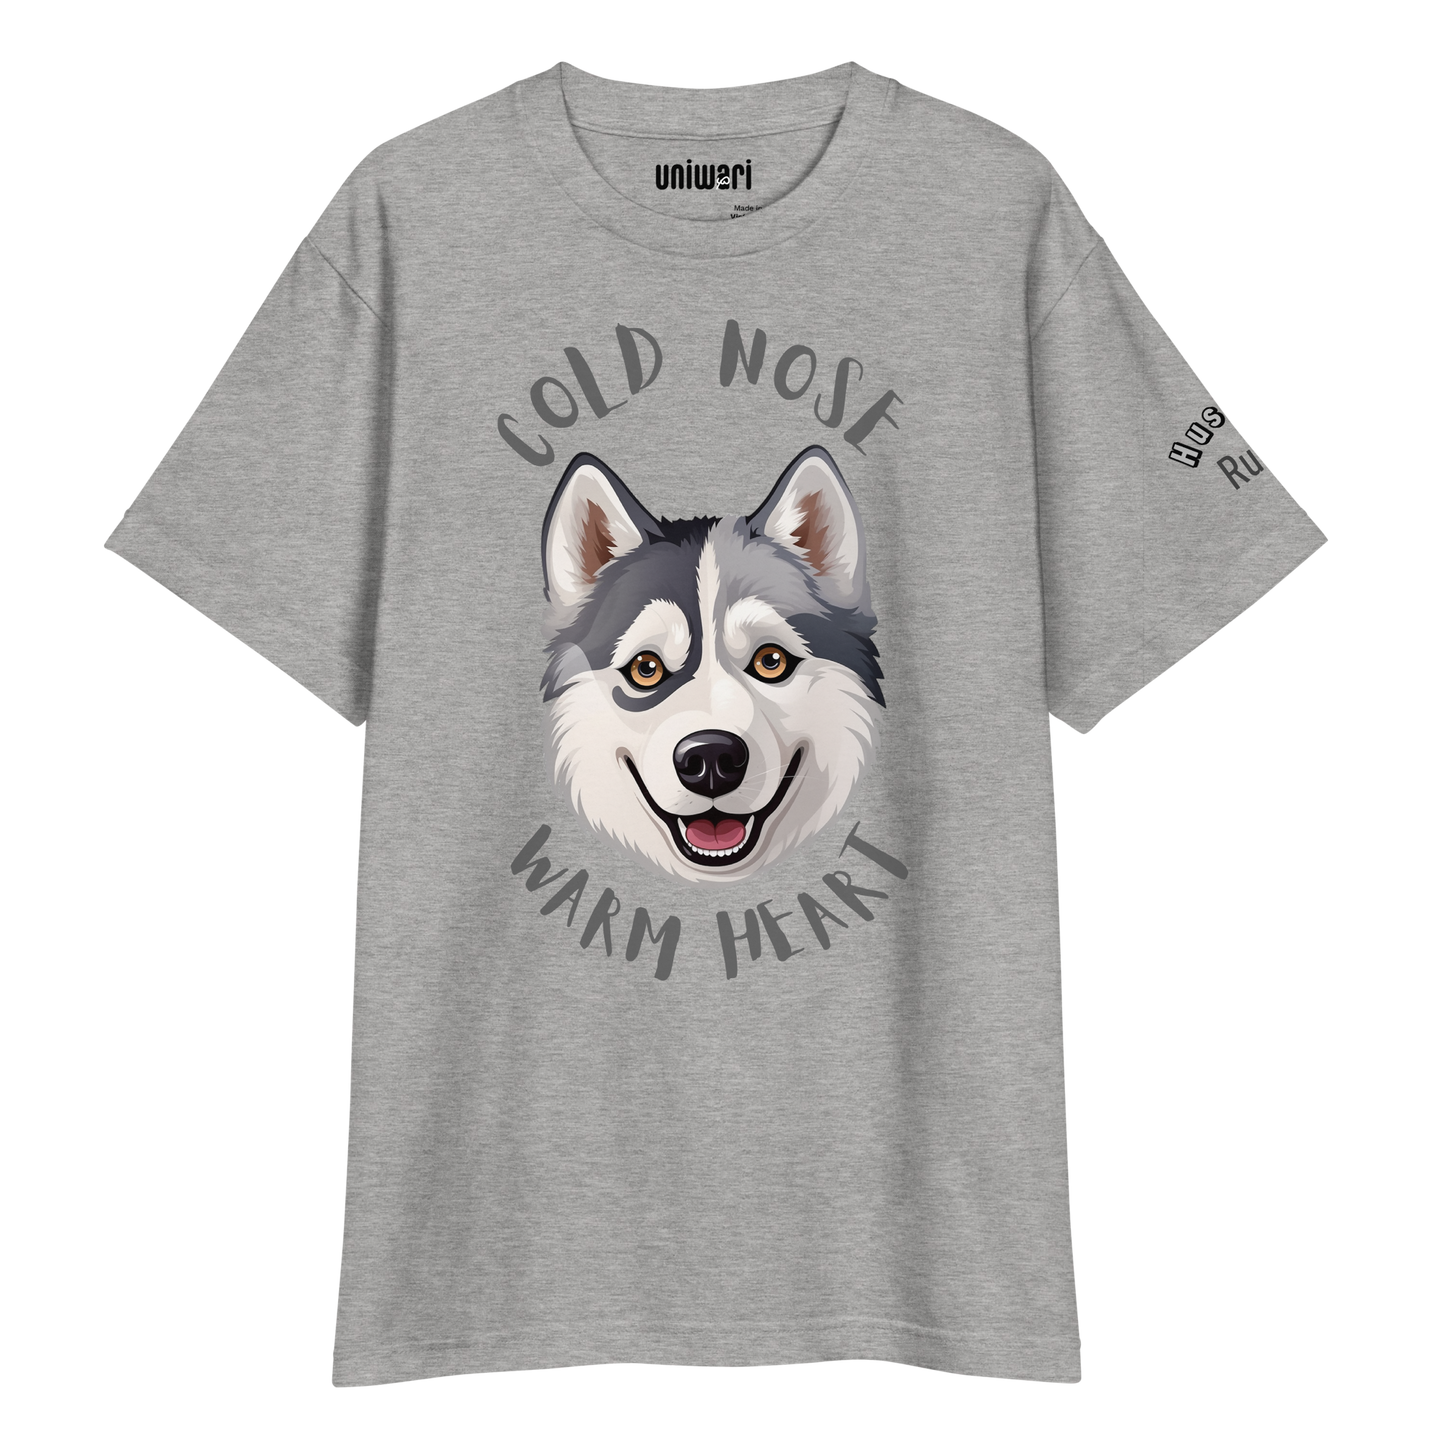 Gray High Quality Tee - Front Design with a stamp of a Husky and the phrase "cold nose warm heart" - Left Shoulder with phrase "Husky Rules"